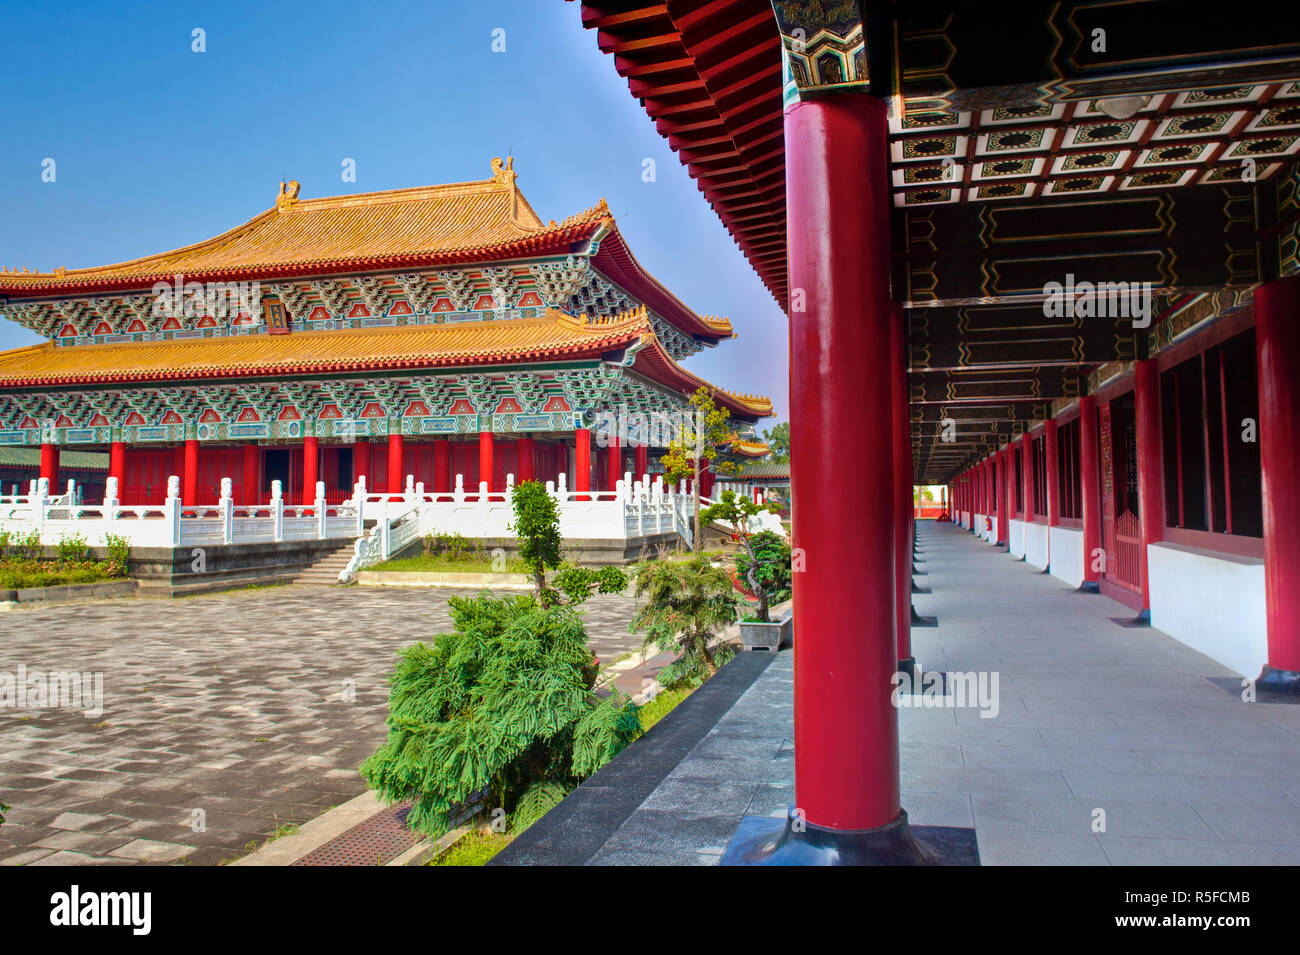 Taiwan, Kaohsiung, Lotus pond, Zuoying Confucius Temple Stock Photo